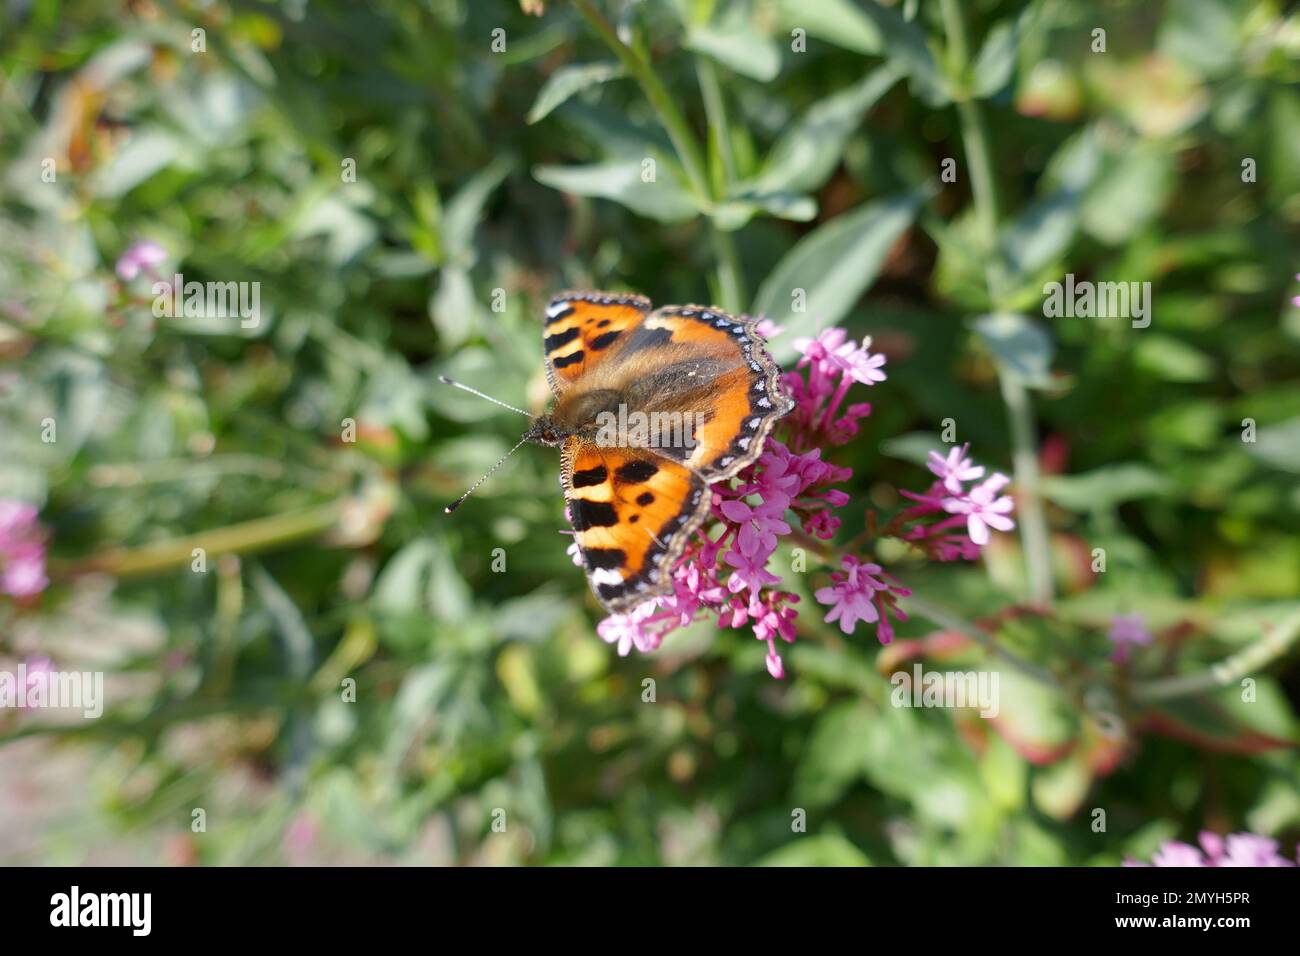 Small pink flowers getting pollinated by orange butterfly Stock Photo